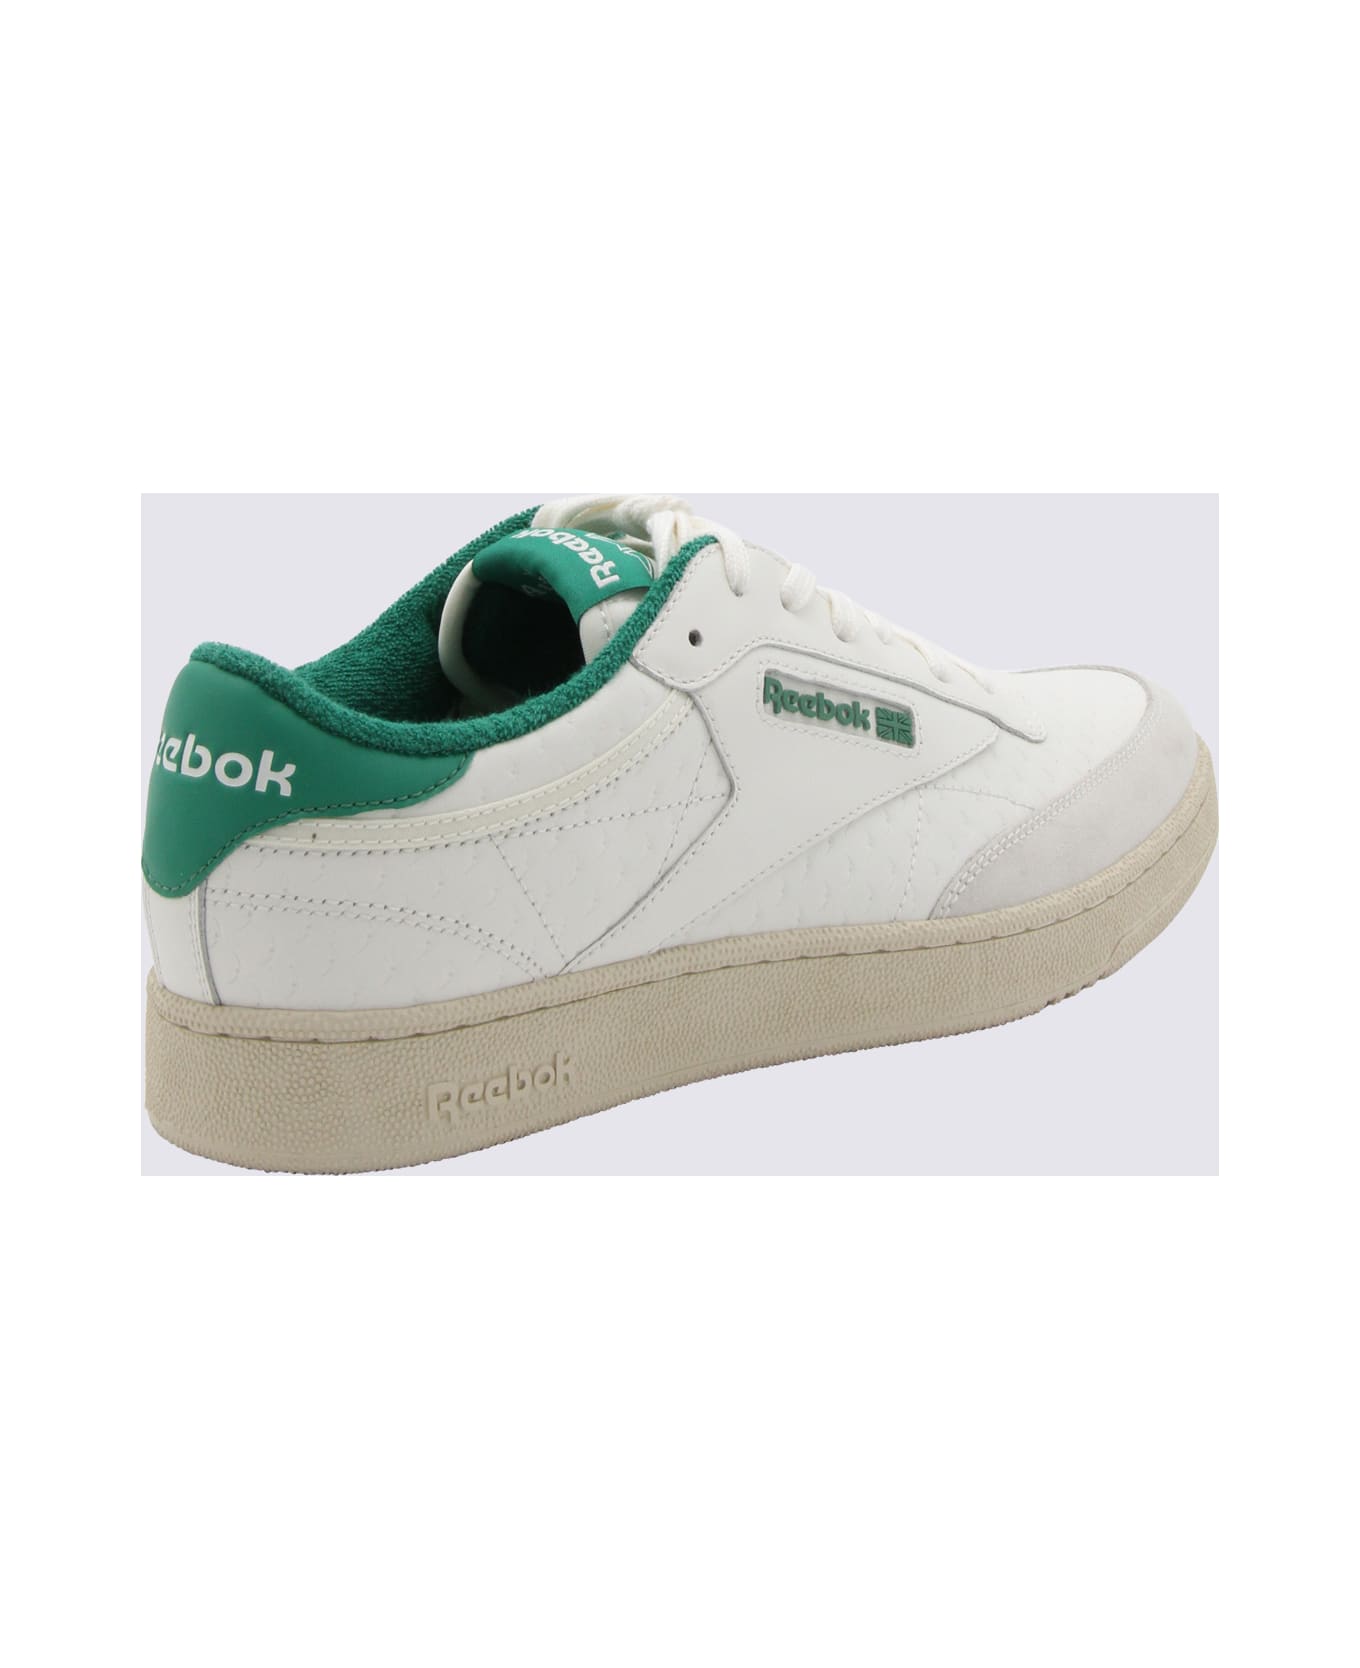 Reebok White And Green Leather Sneakers - White スニーカー